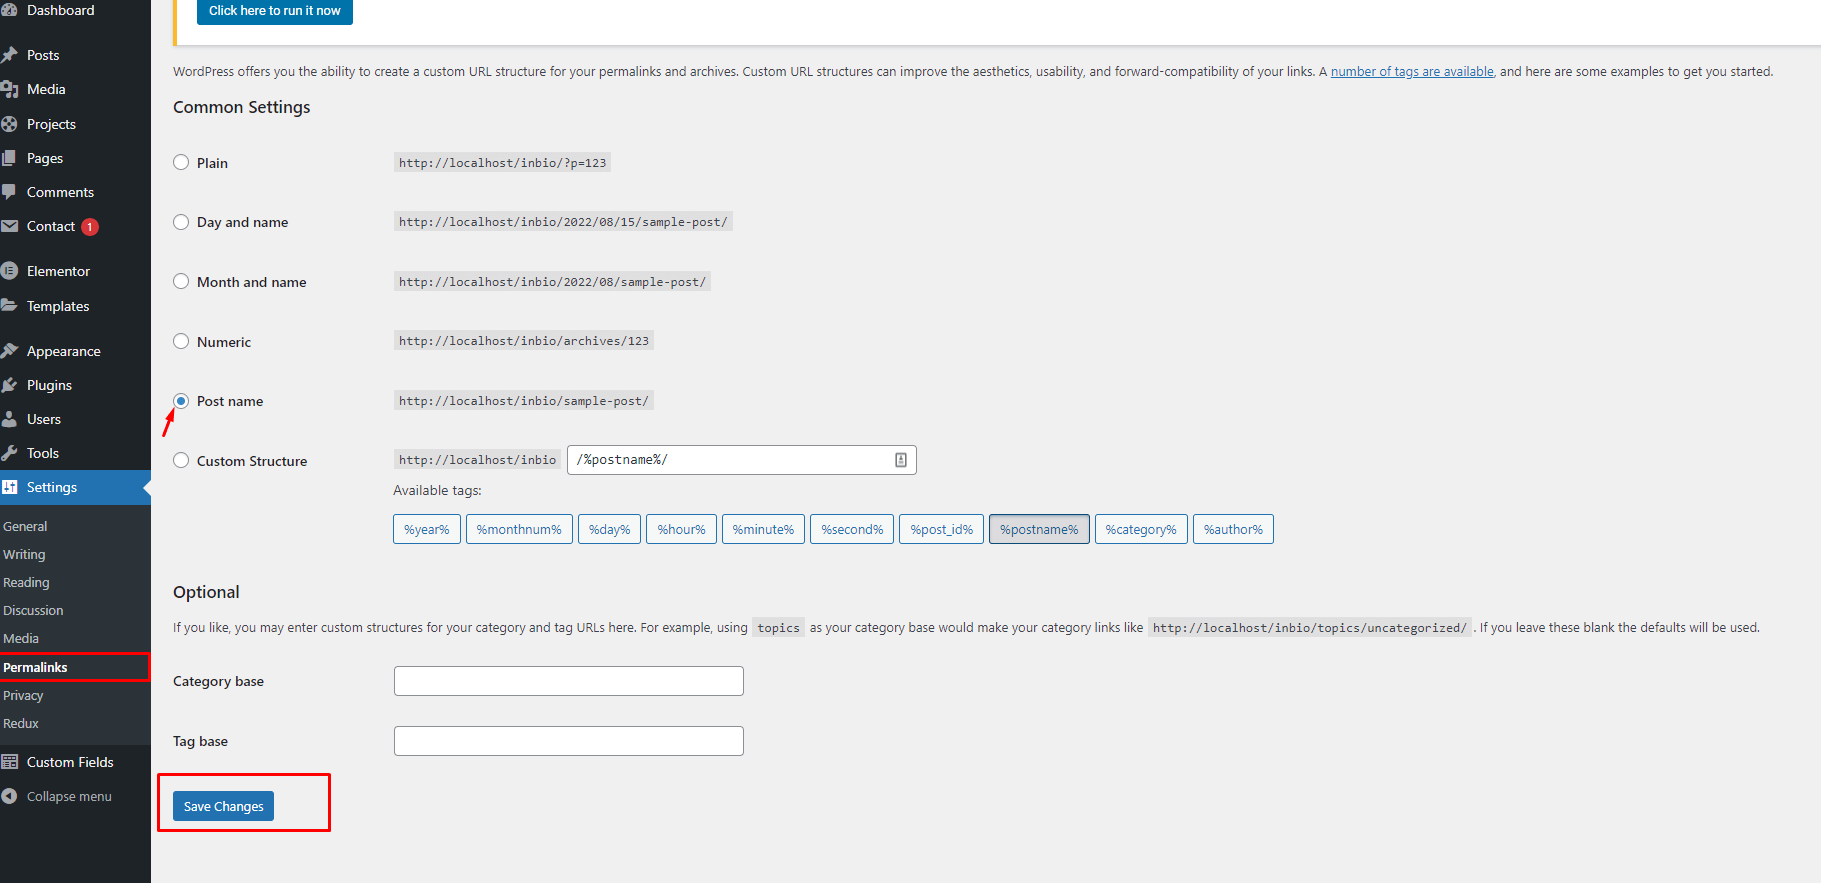 go to Appearance -> Import Demo Data